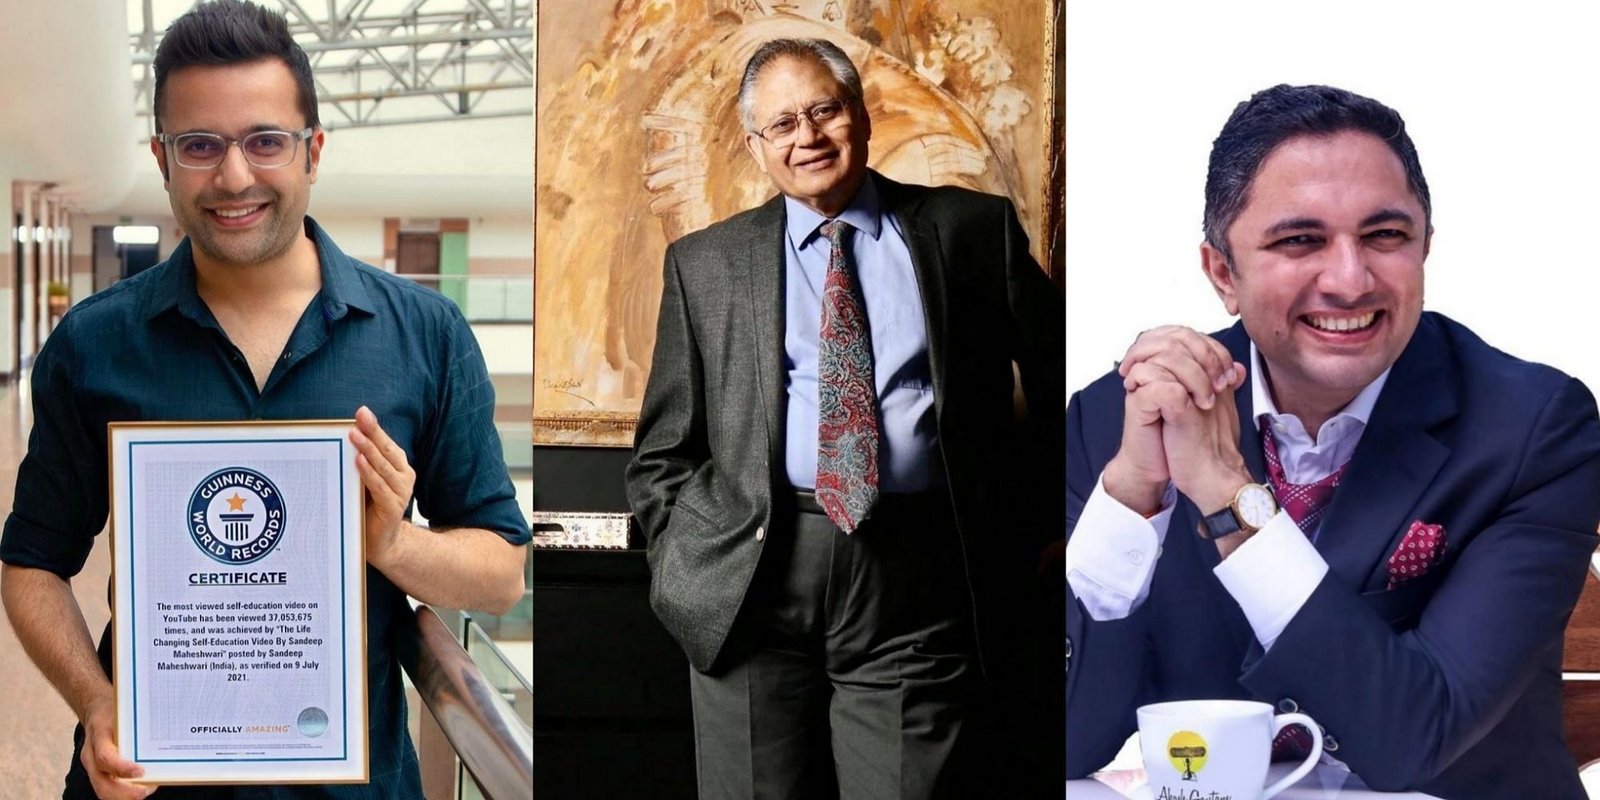 Talks By These Top 10 Motivational Speakers Can Change Your Life As It Did For Lakhs Of People